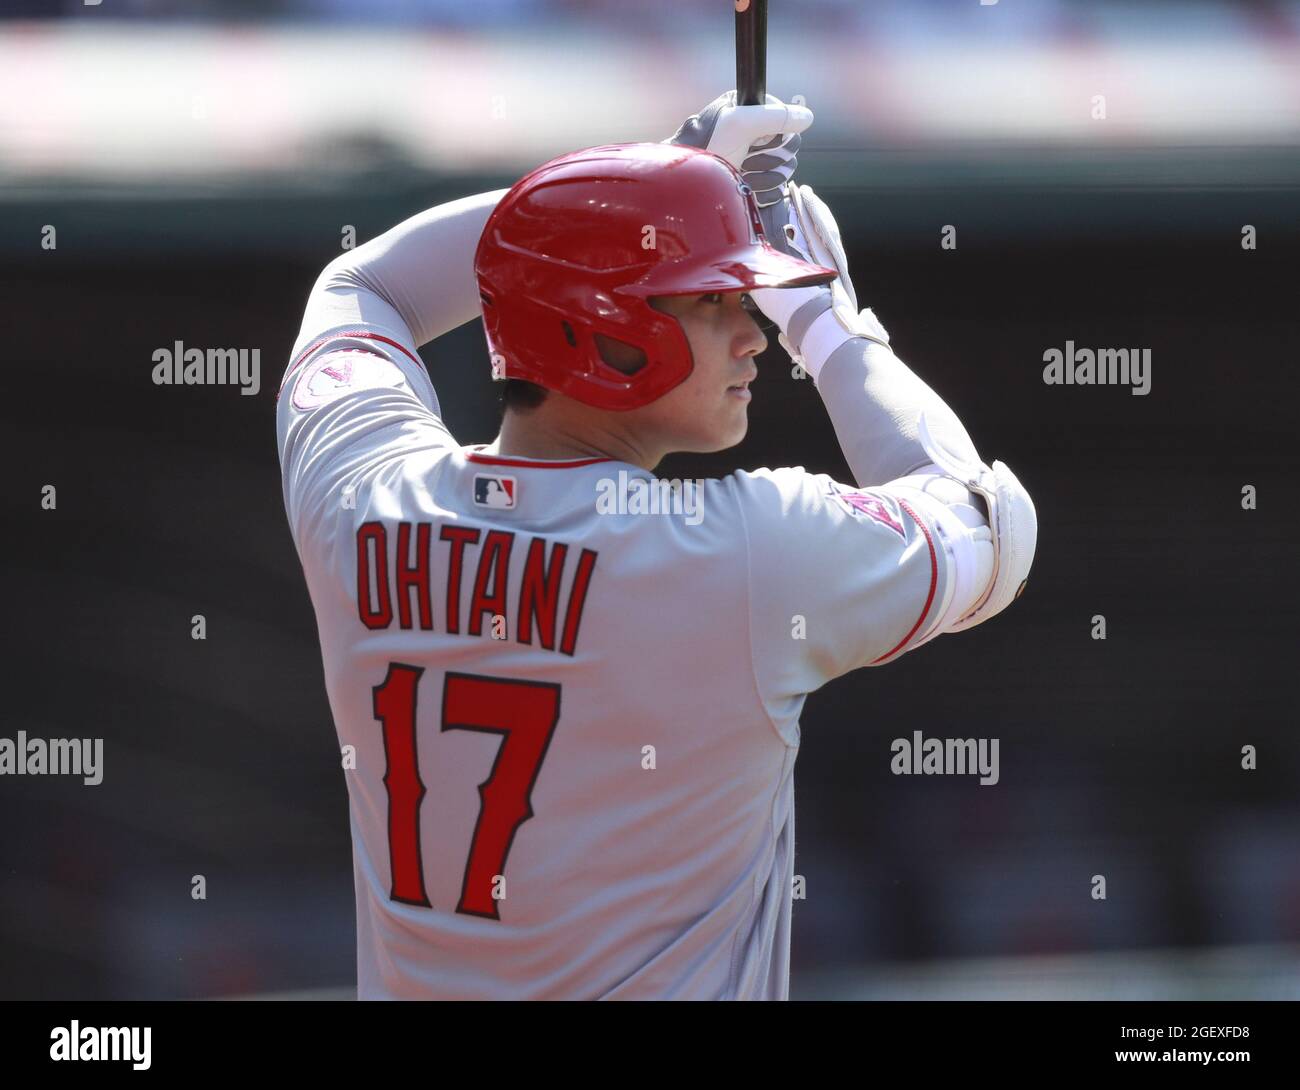 Cleveland, United States. 21st Aug, 2021. Los Angeles Angels Shohei Ohtani (17) prepares to bat in the first inning against the Cleveland Indians at Progressive Field in Cleveland, Ohio on Saturday, August 21, 2021. Photo by Aaron Josefczyk/UPI Credit: UPI/Alamy Live News Stock Photo